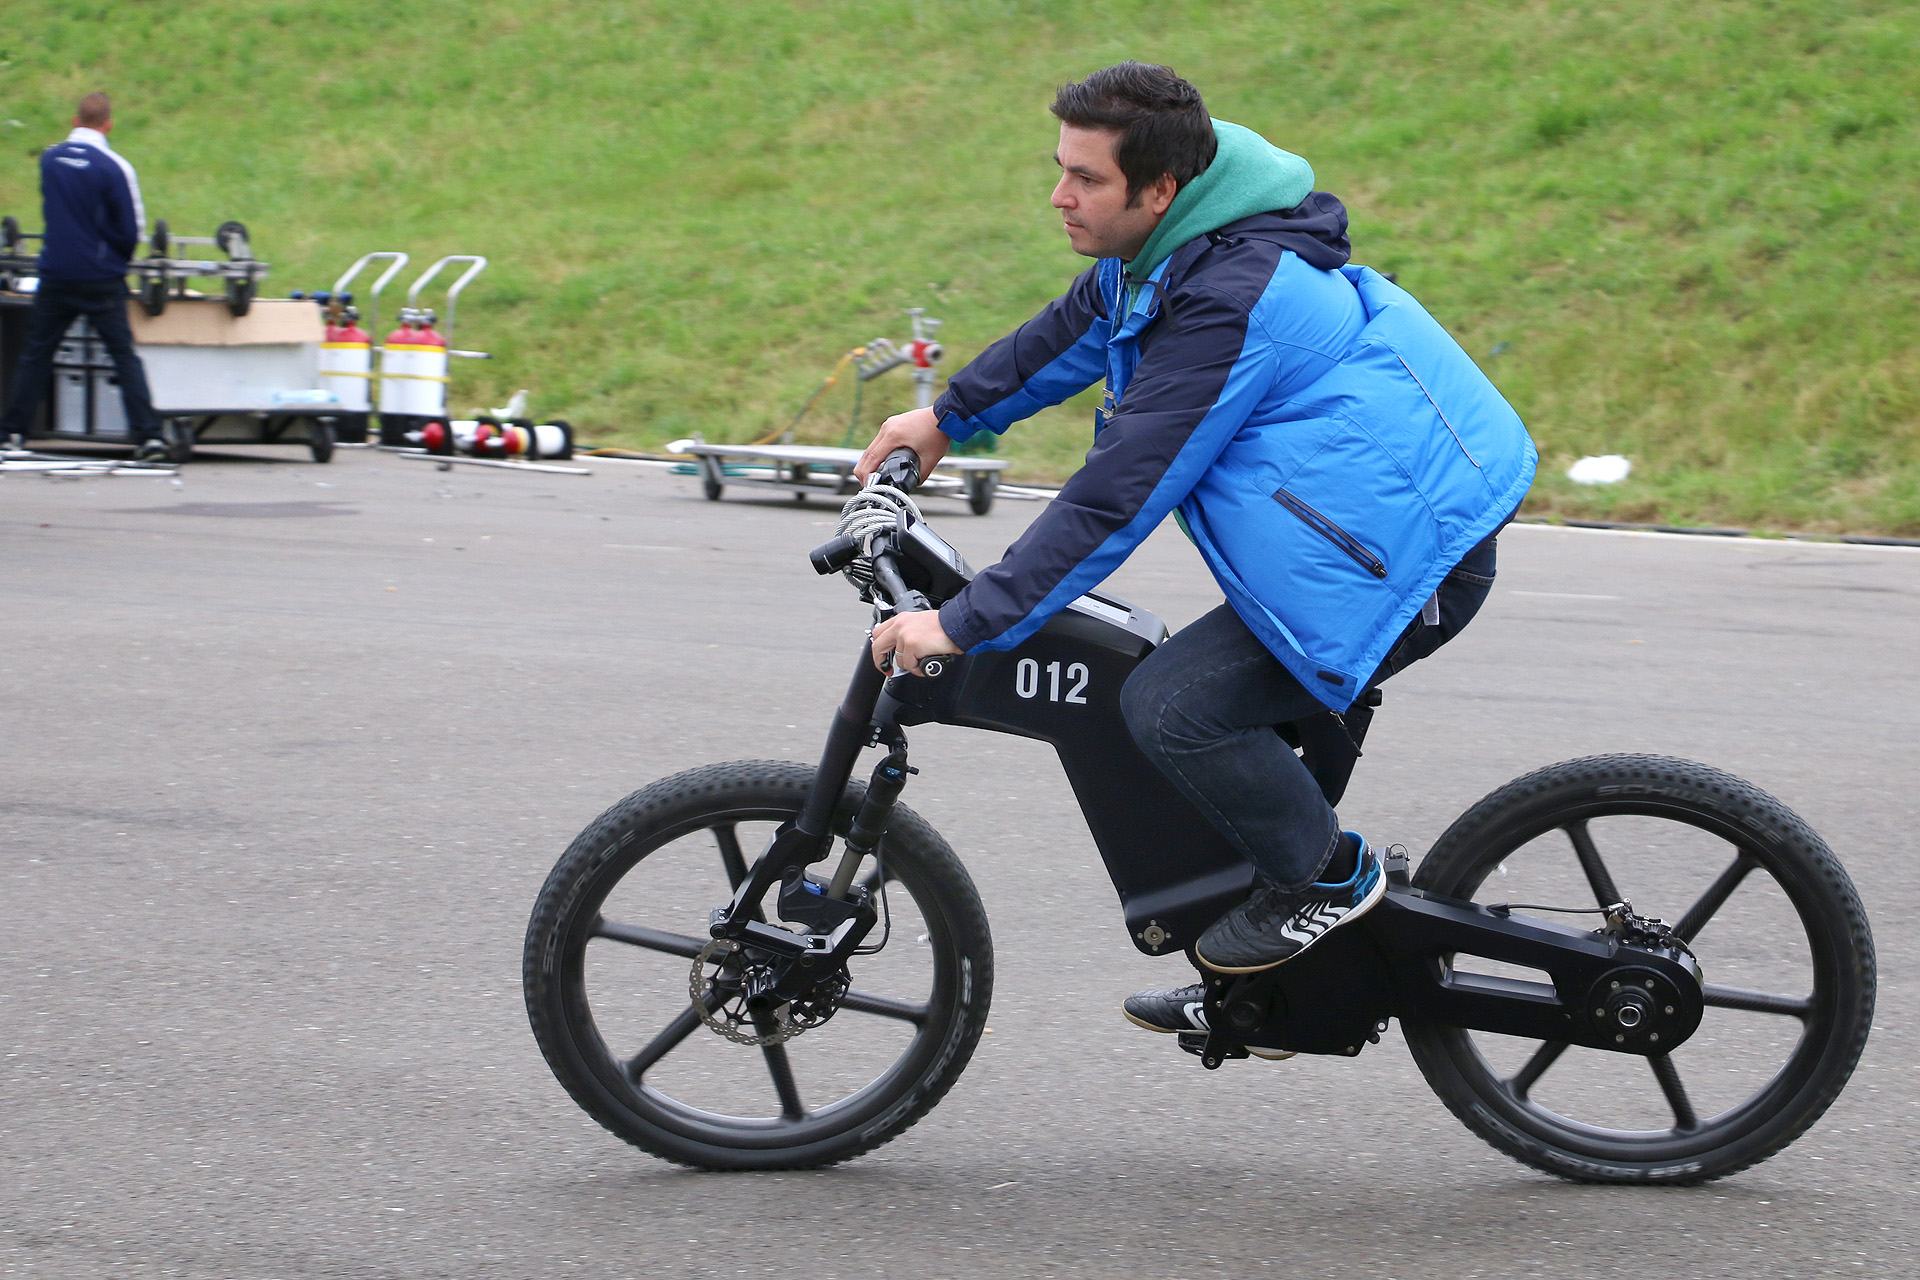 What It’s Like To Ride This Incredible E-Bike At 60km/h